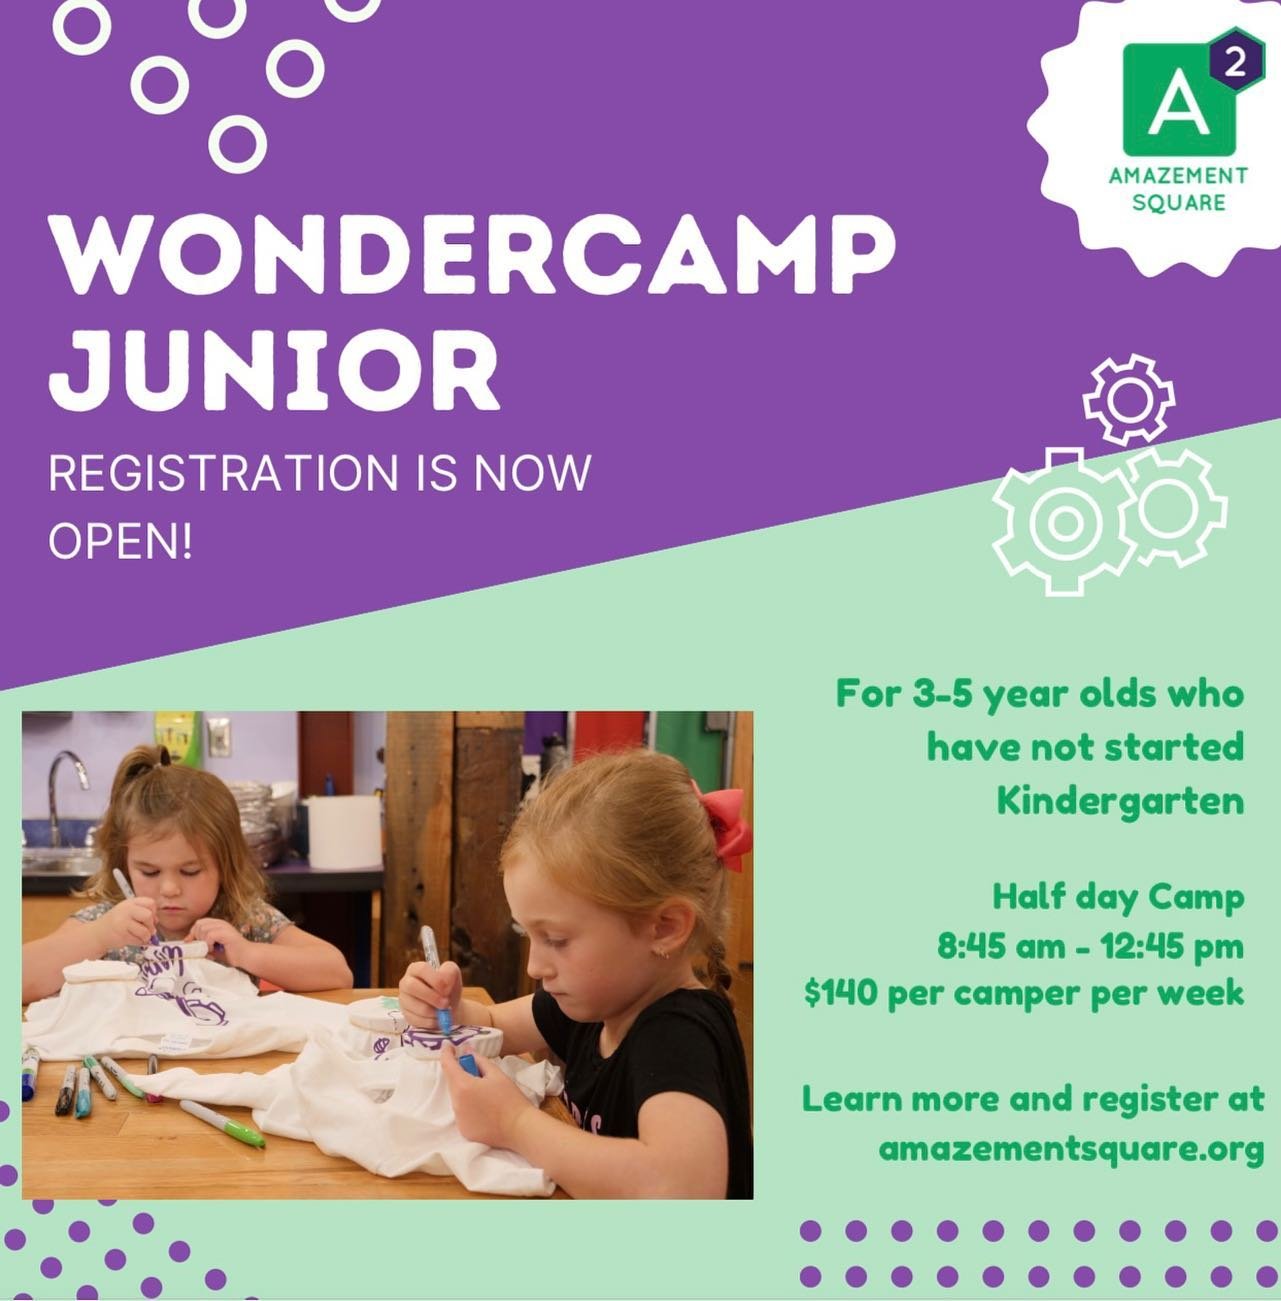 There&rsquo;s still time to register for Junior, Explorer, and Adventurer WonderCamps this summer! There are only a few spots left in our Explorer camps, so don&rsquo;t miss out! ☀️

Click the link in our bio to learn more and register your campers!